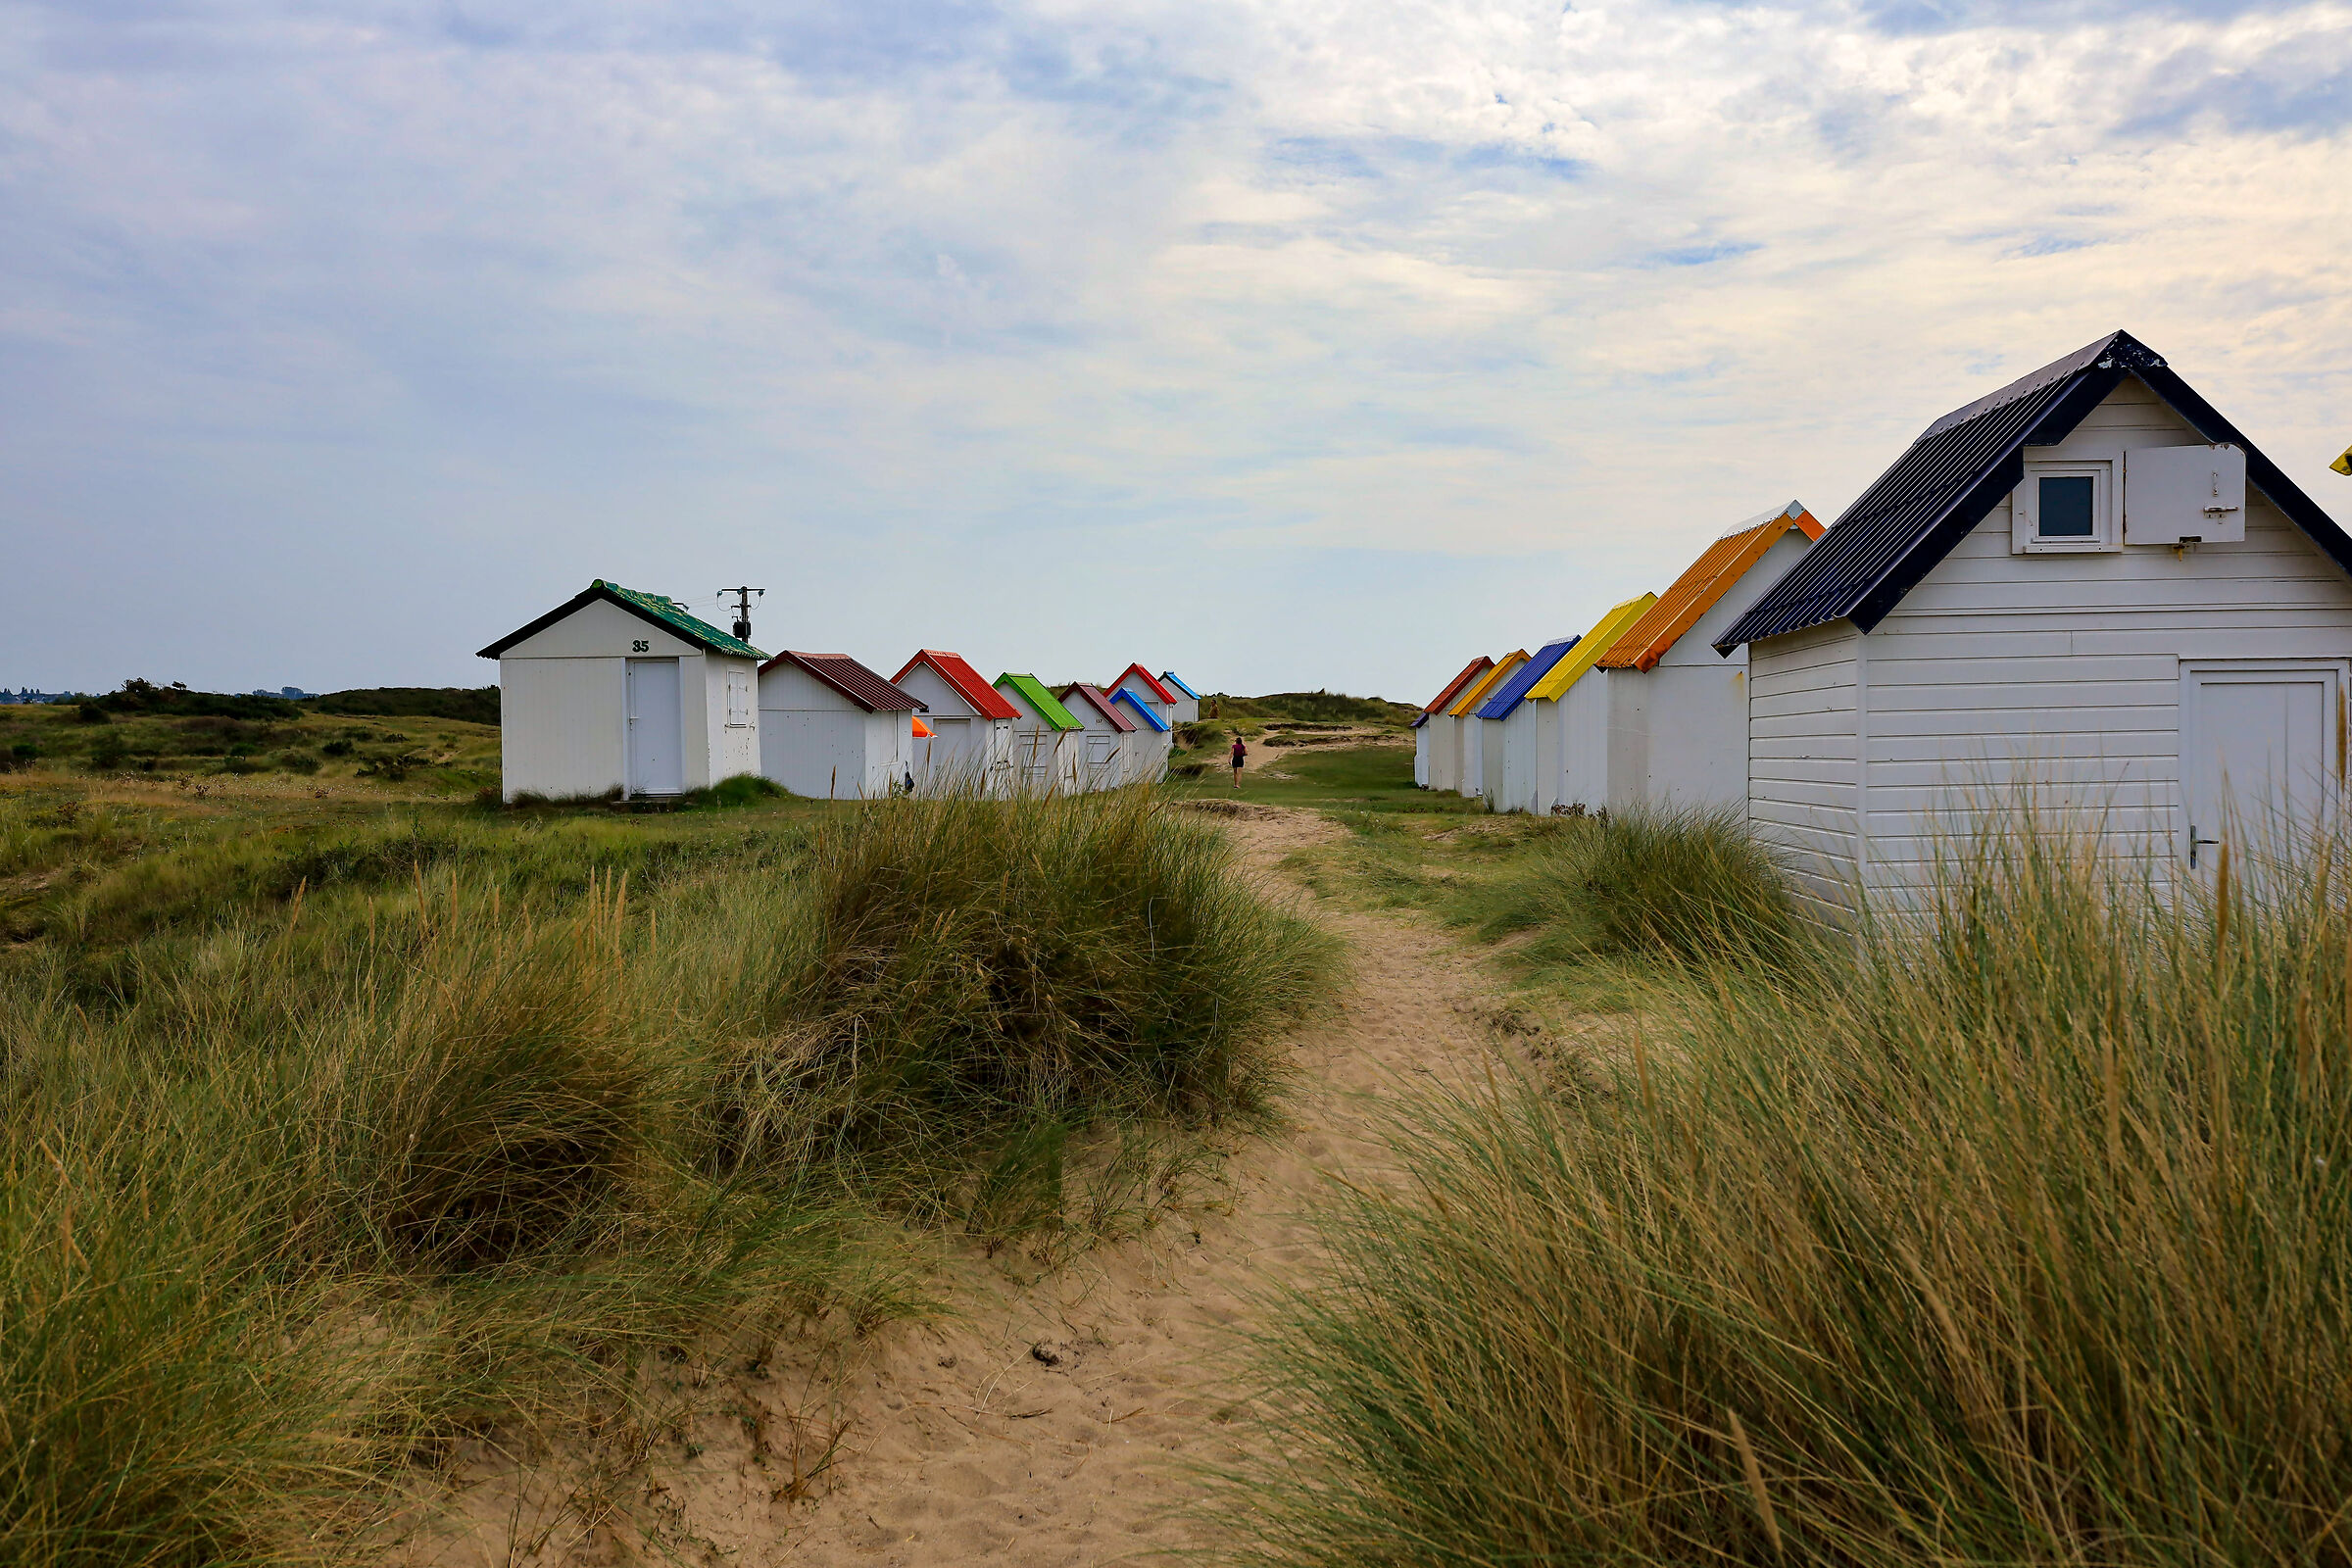 The cabins of Gouville sur mer...